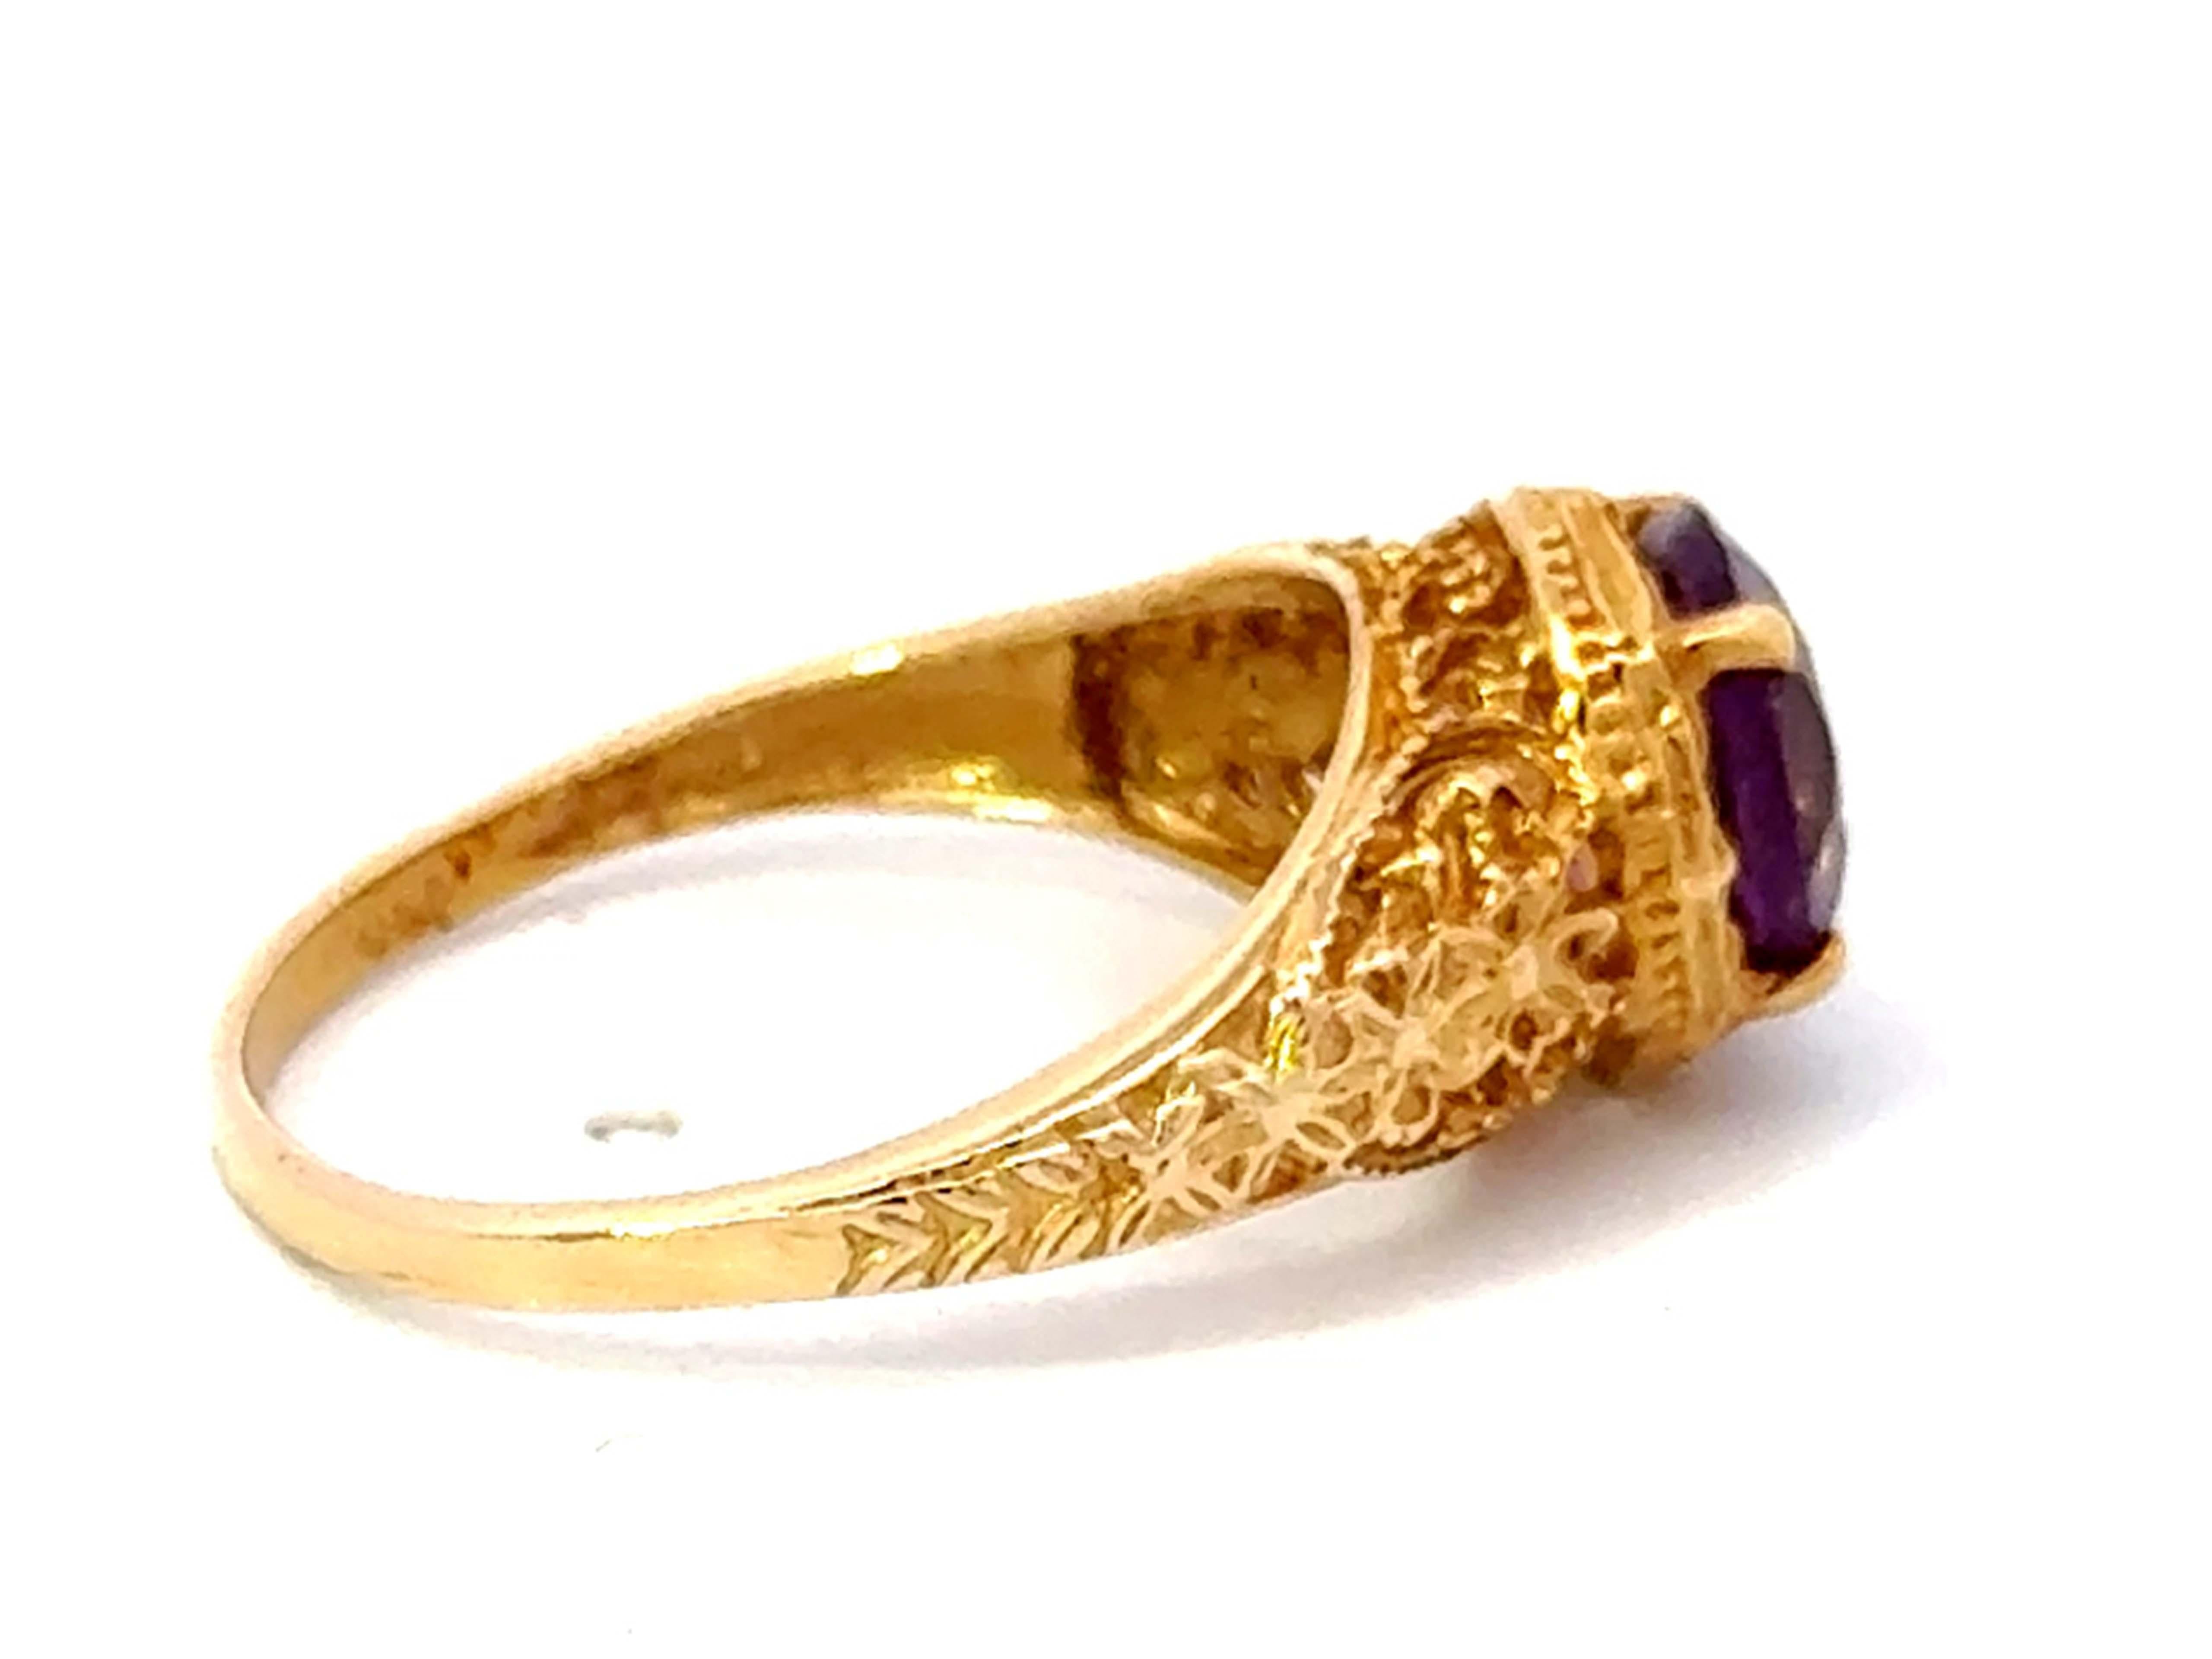 Round Purple Amethyst Filigree Ring 14k Yellow Gold In Excellent Condition For Sale In Honolulu, HI